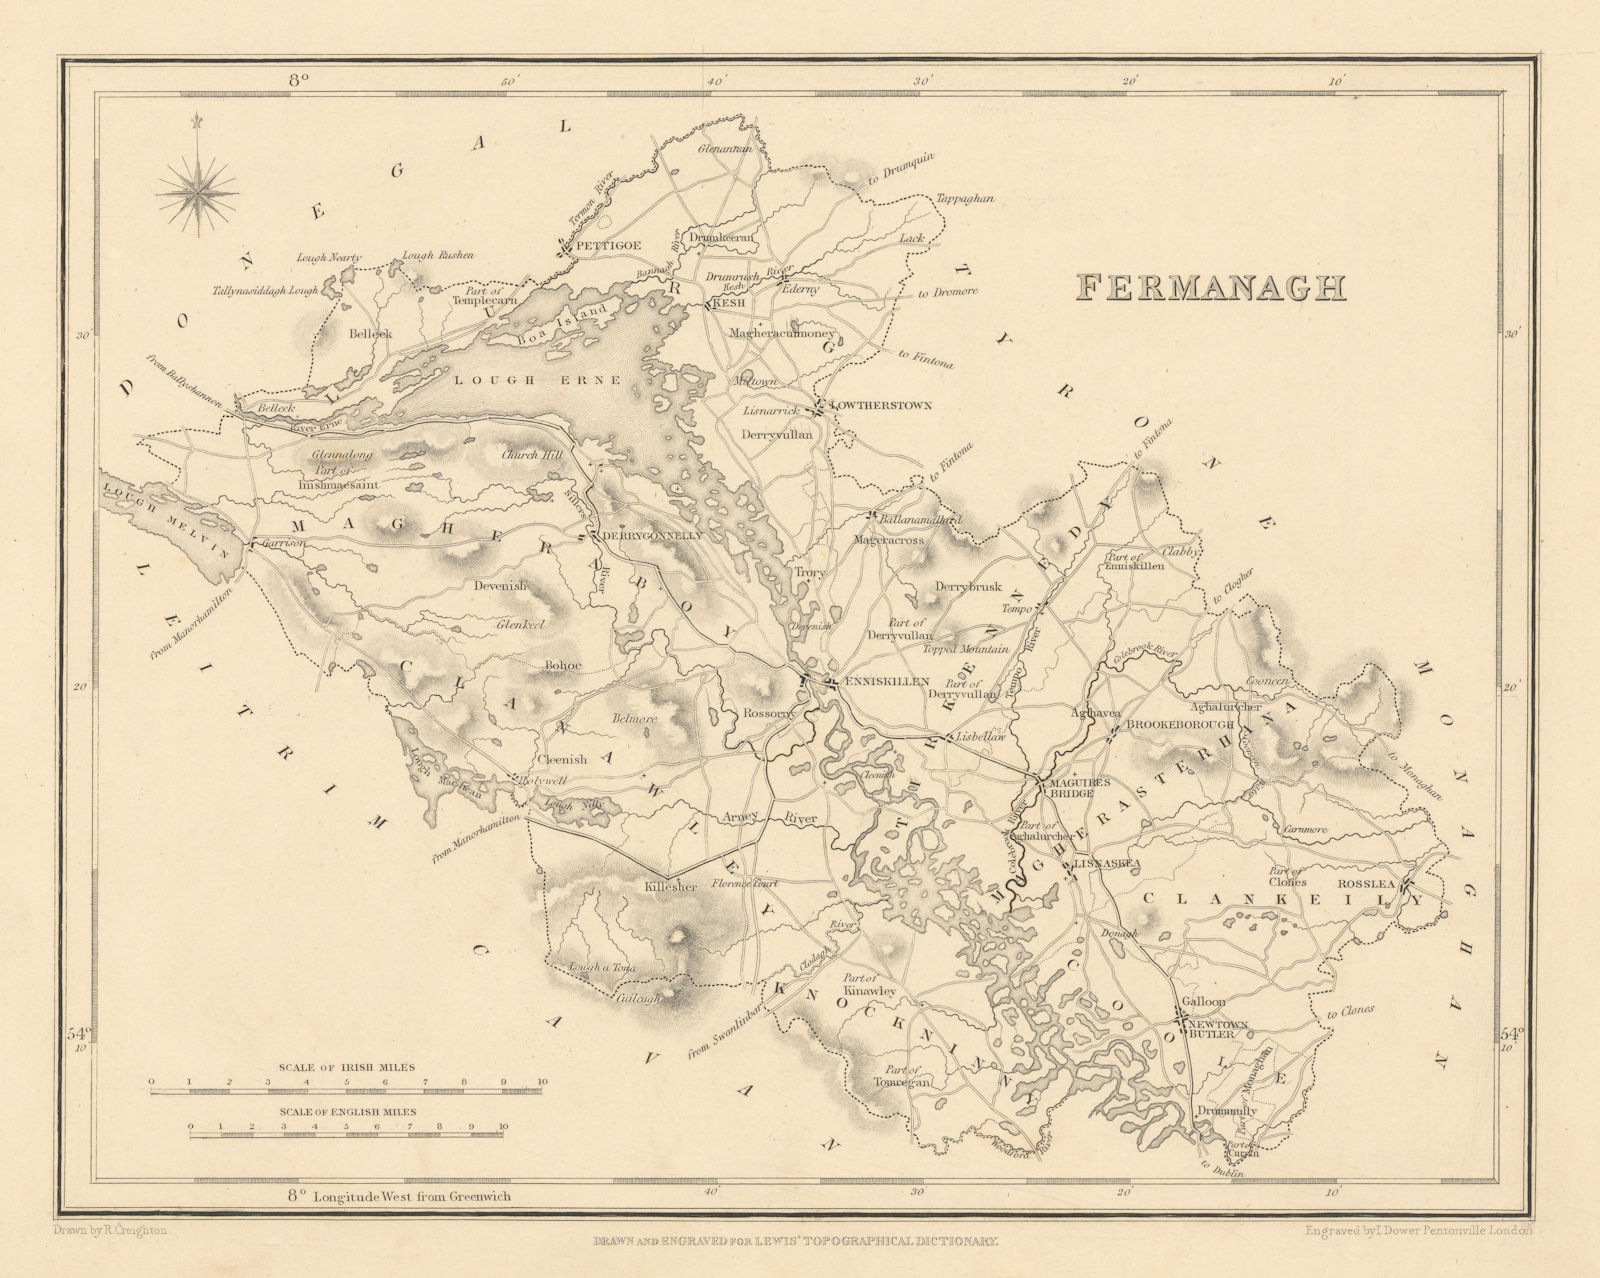 COUNTY FERMANAGH antique map for LEWIS by CREIGHTON & DOWER - Ulster 1837